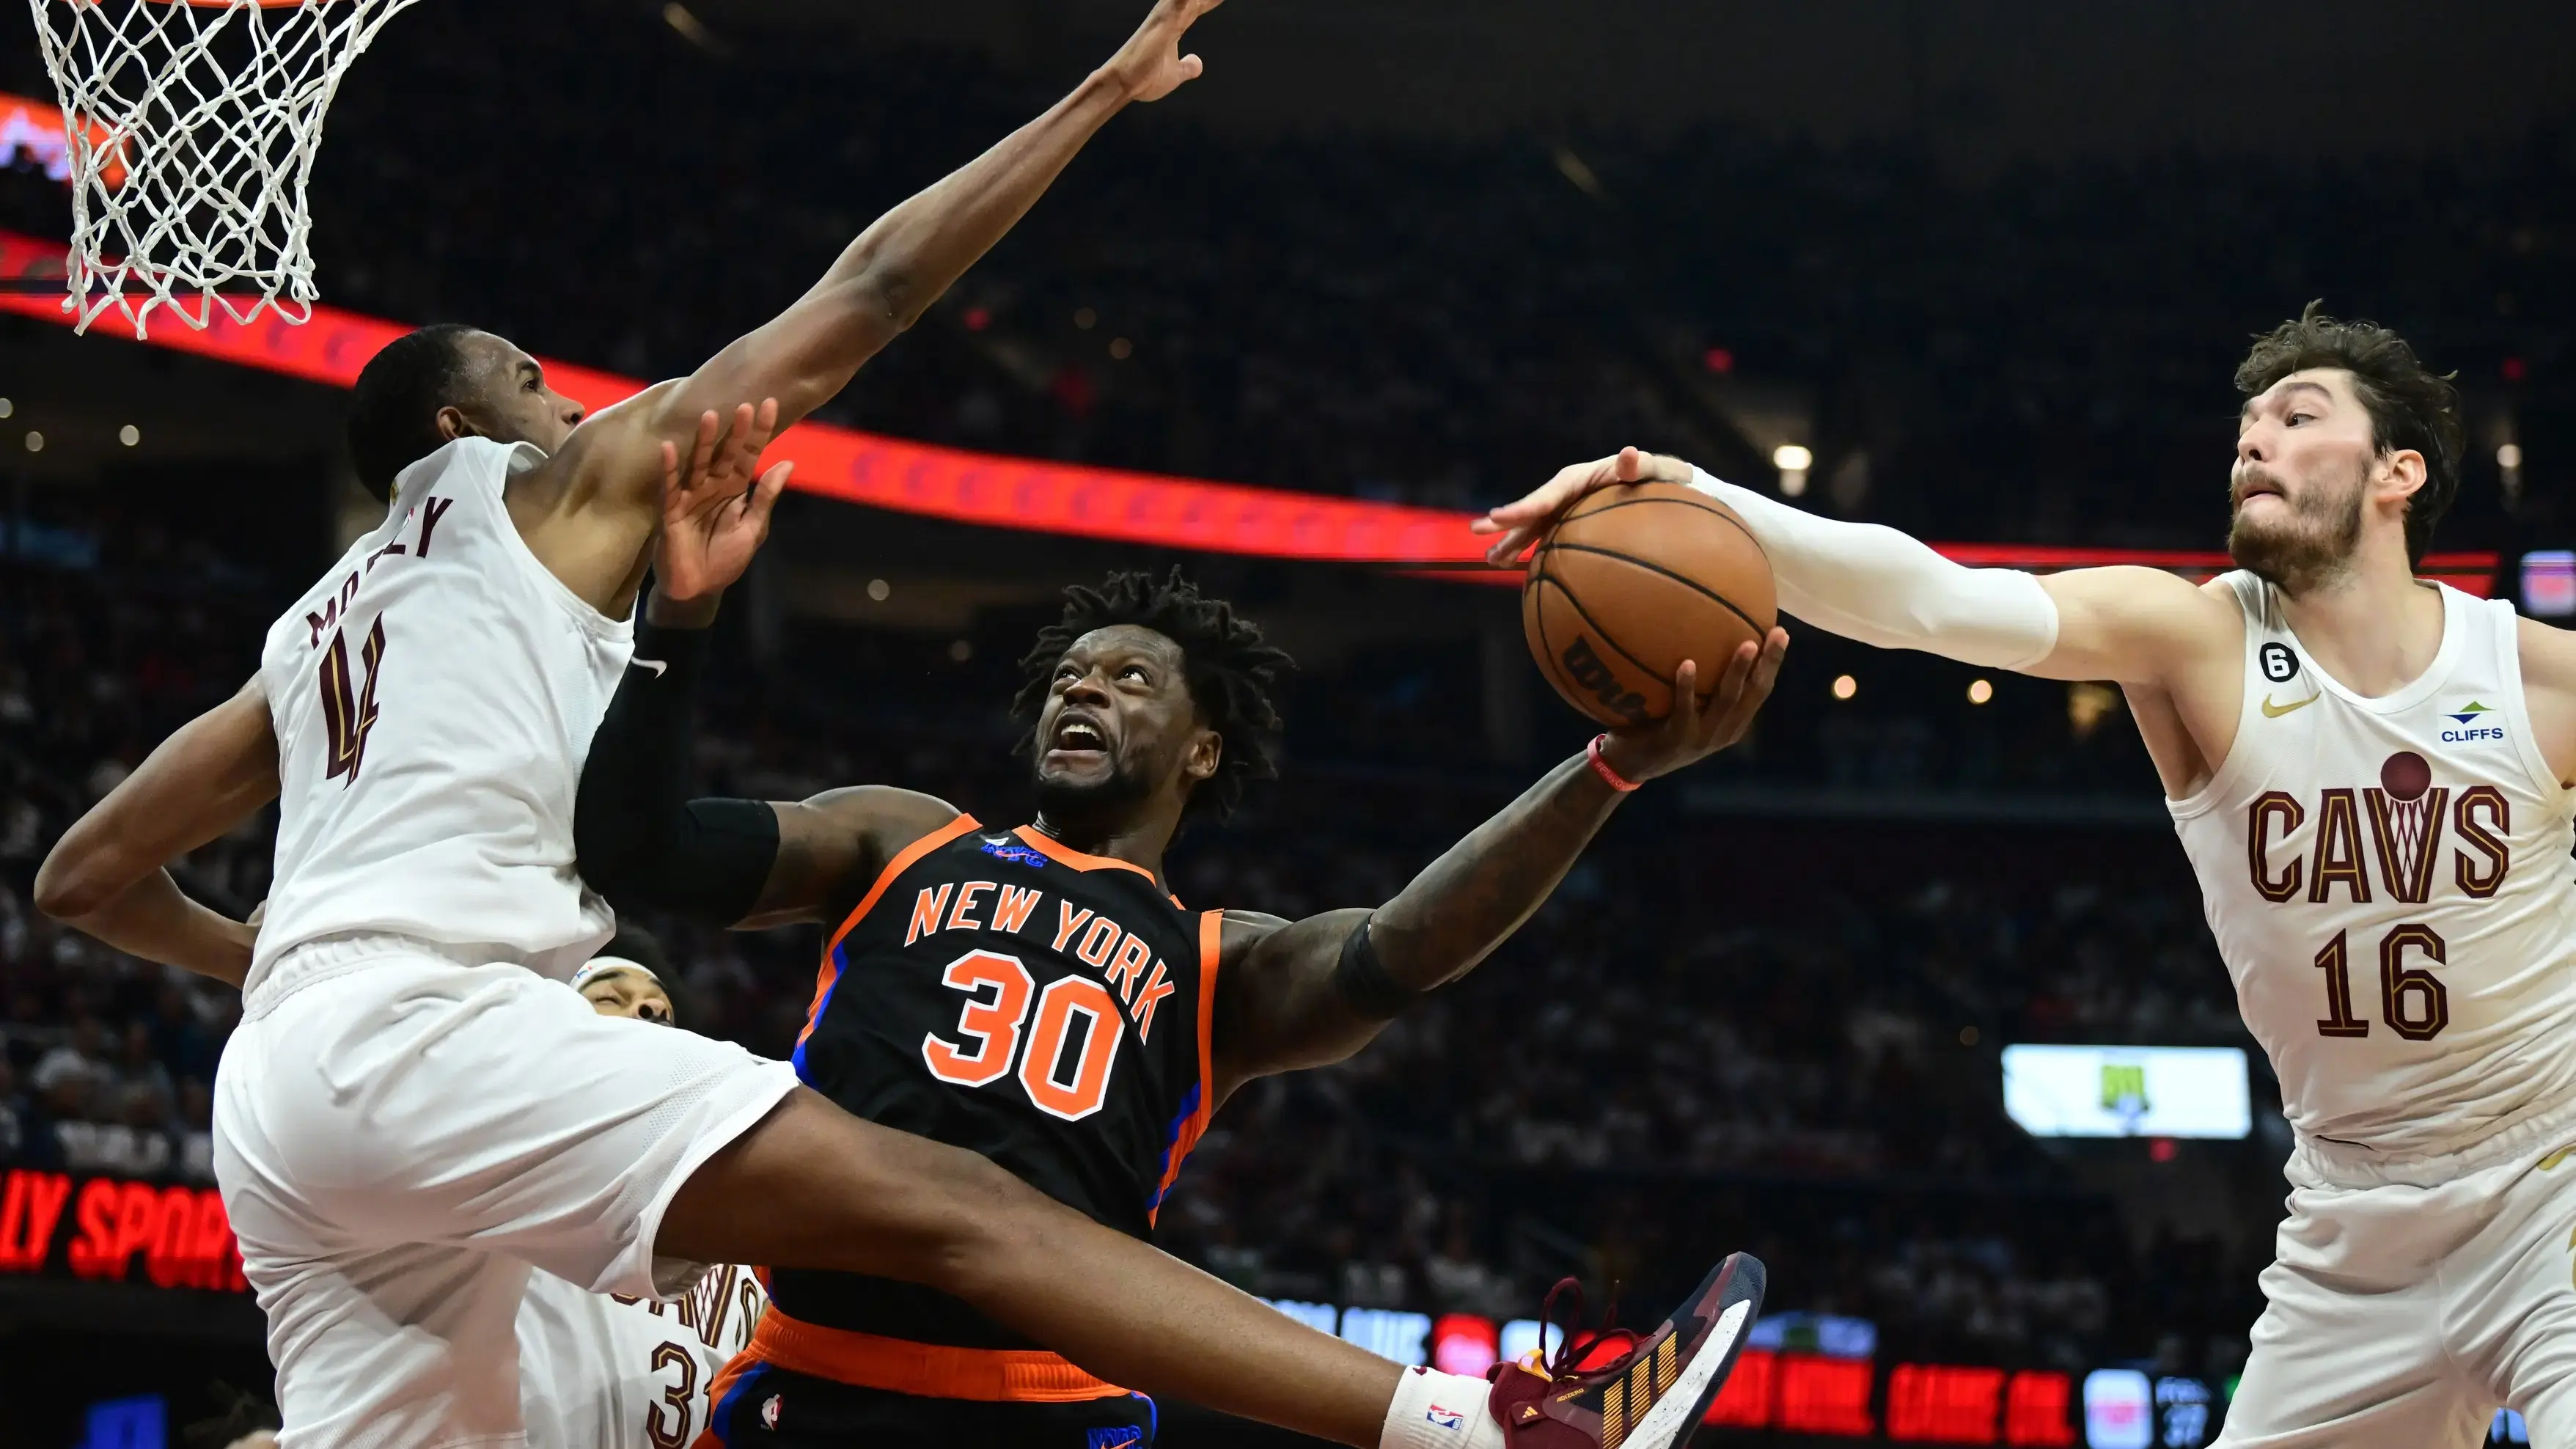 Apr 18, 2023; Cleveland, Ohio, USA; New York Knicks forward Julius Randle (30) drives to the basket between Cleveland Cavaliers forward Evan Mobley (4) and forward Cedi Osman (16) during the second quarter of game two of the 2023 NBA playoffs at Rocket Mortgage FieldHouse. / Ken Blaze-USA TODAY Sports